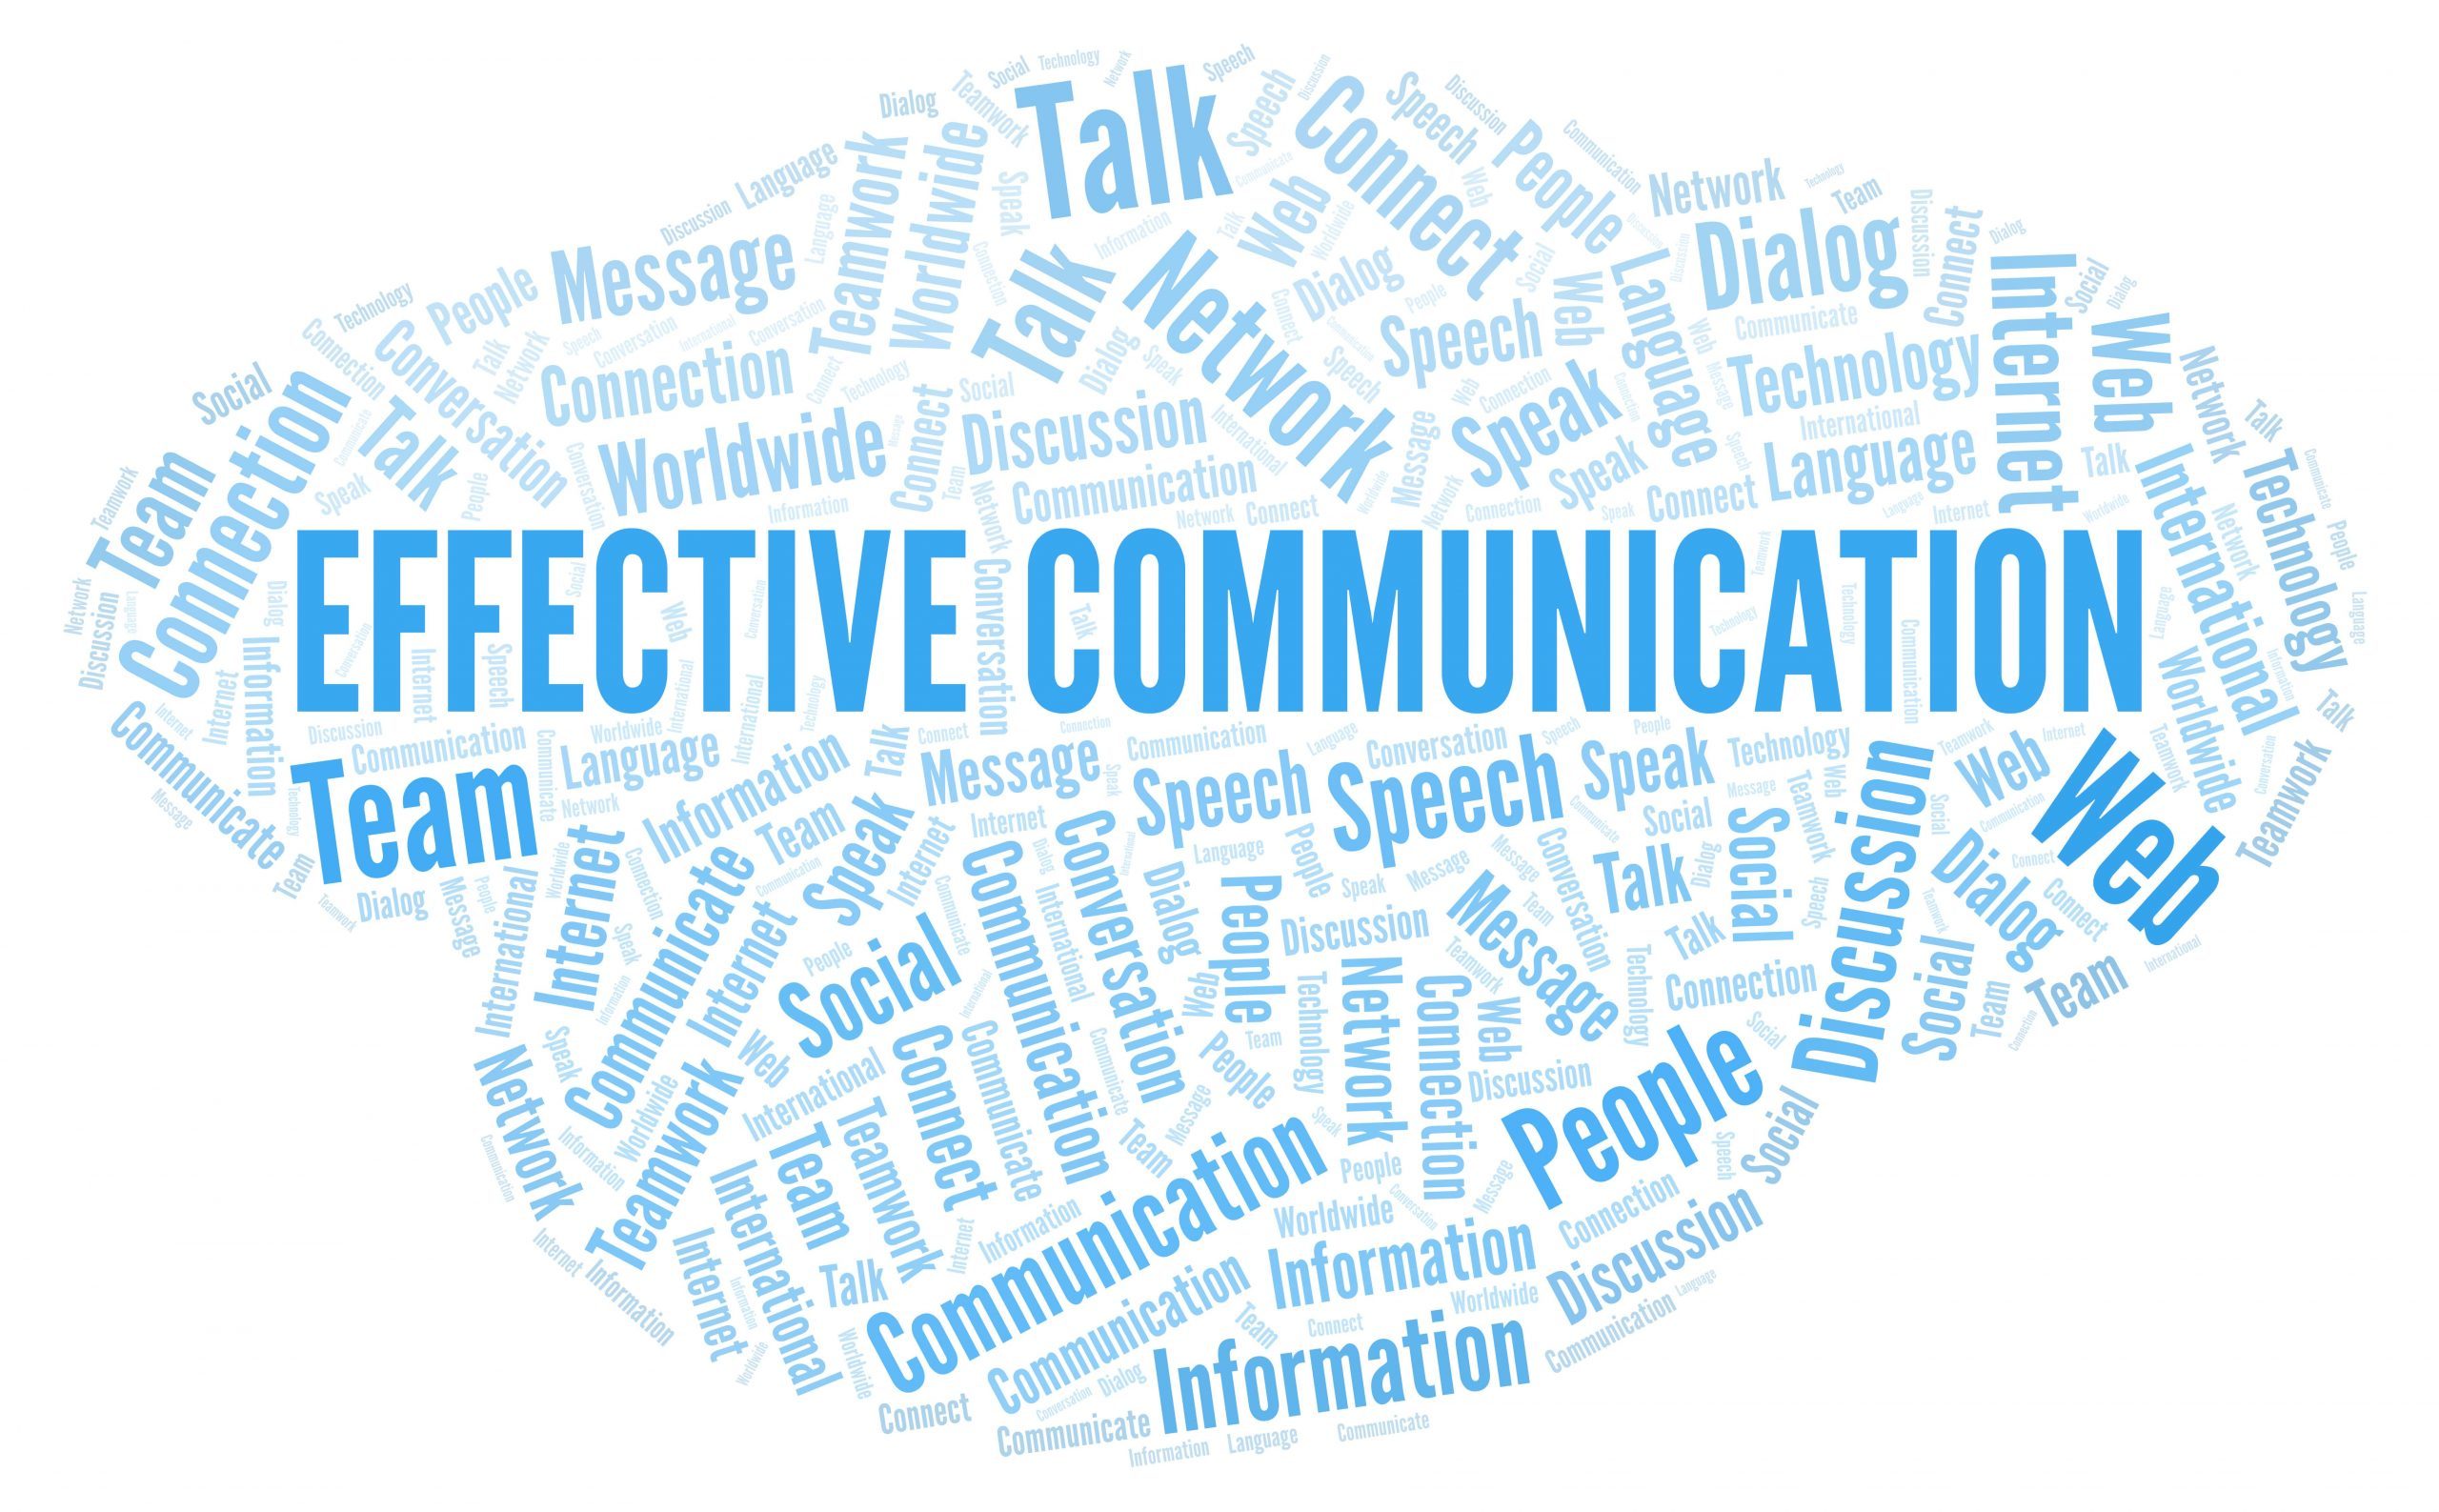 How to Effectively Communicate, Converse and Connect with your Audience